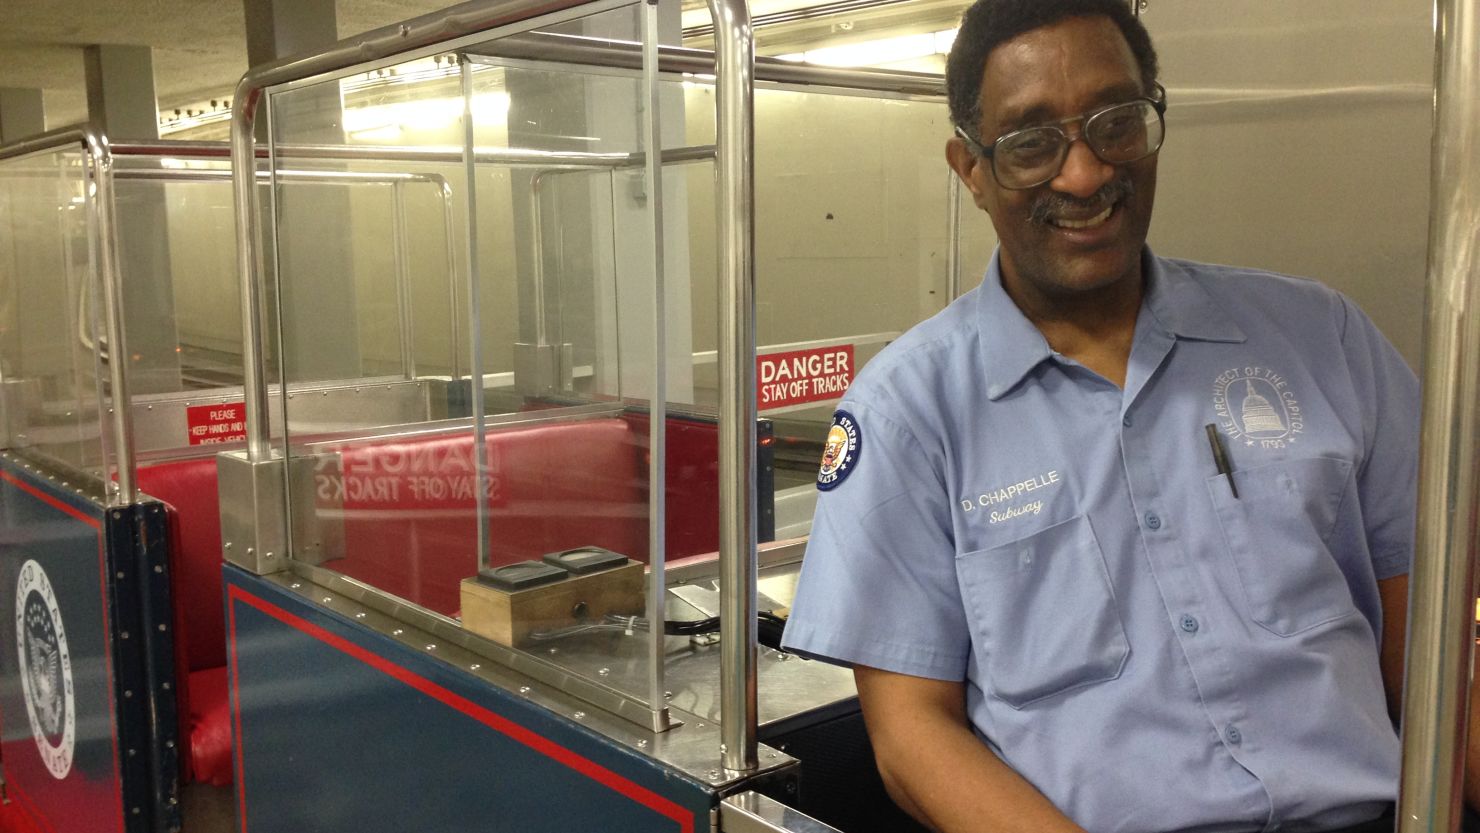 By one estimate, Daryl Chappelle has made 130,000 trips conducting the Capitol's underground subway. 